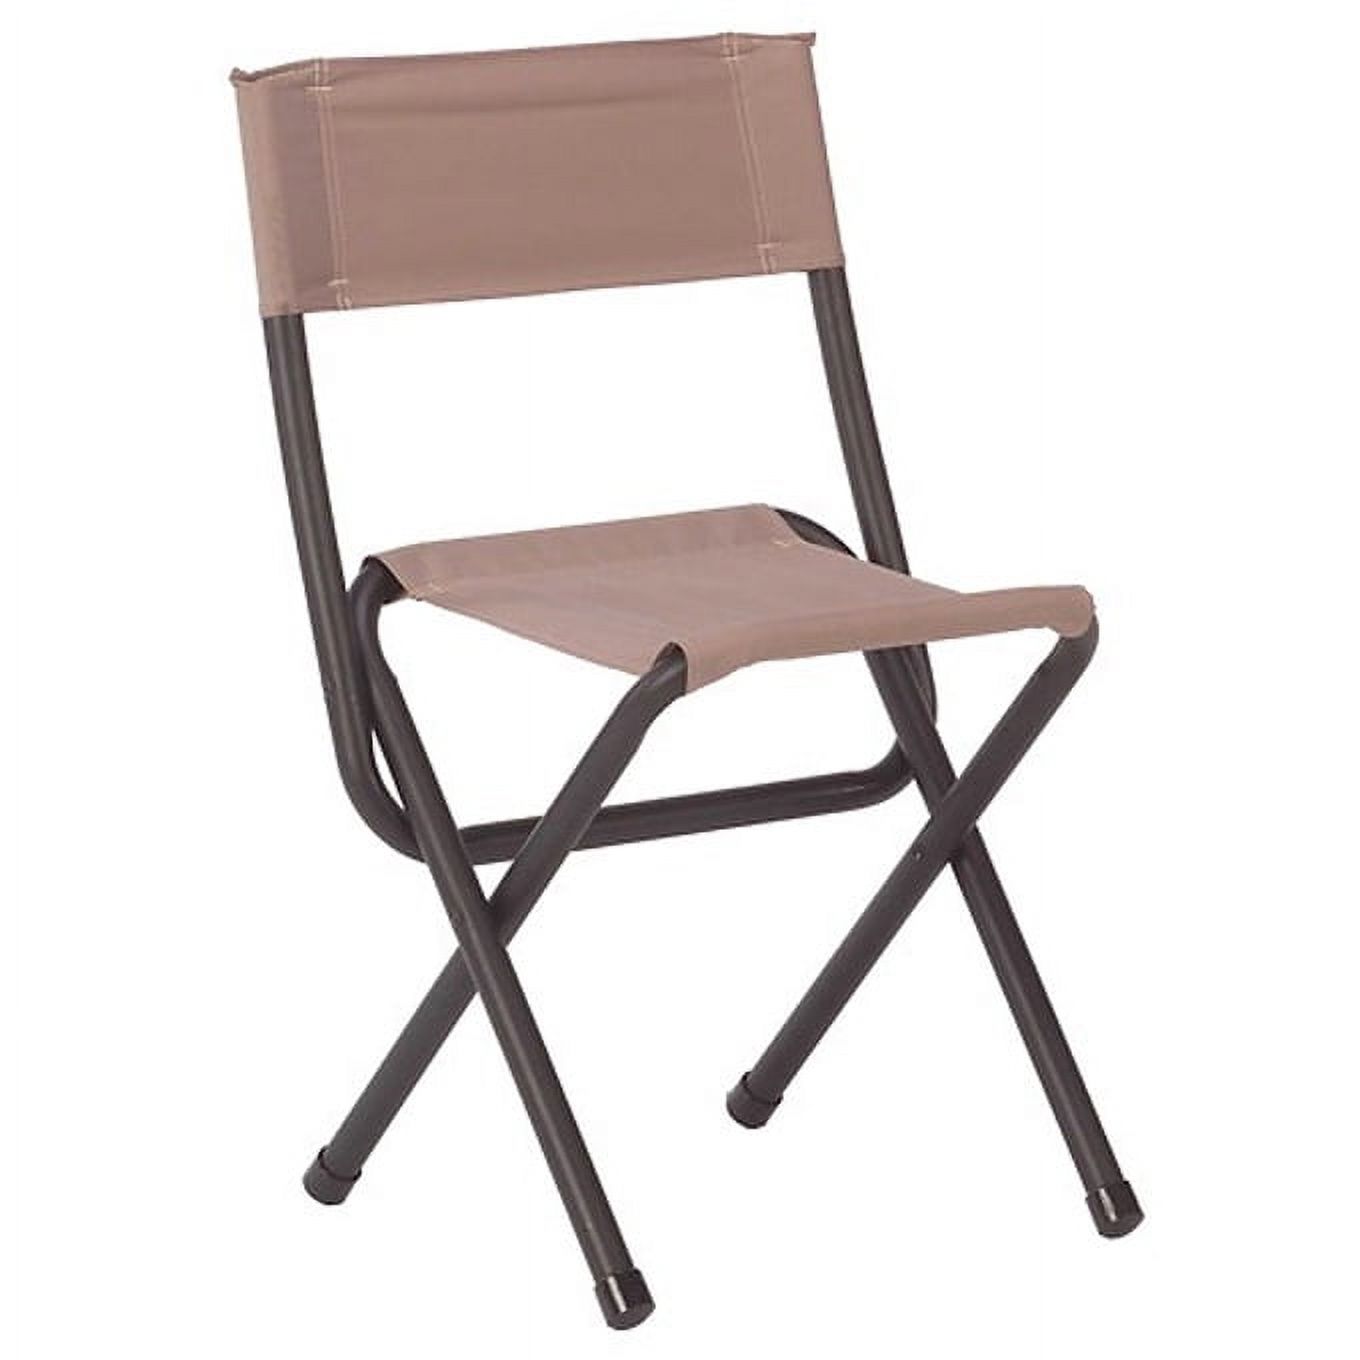 Coleman Woodsman II Adult Camping Chair, Beige - image 1 of 6